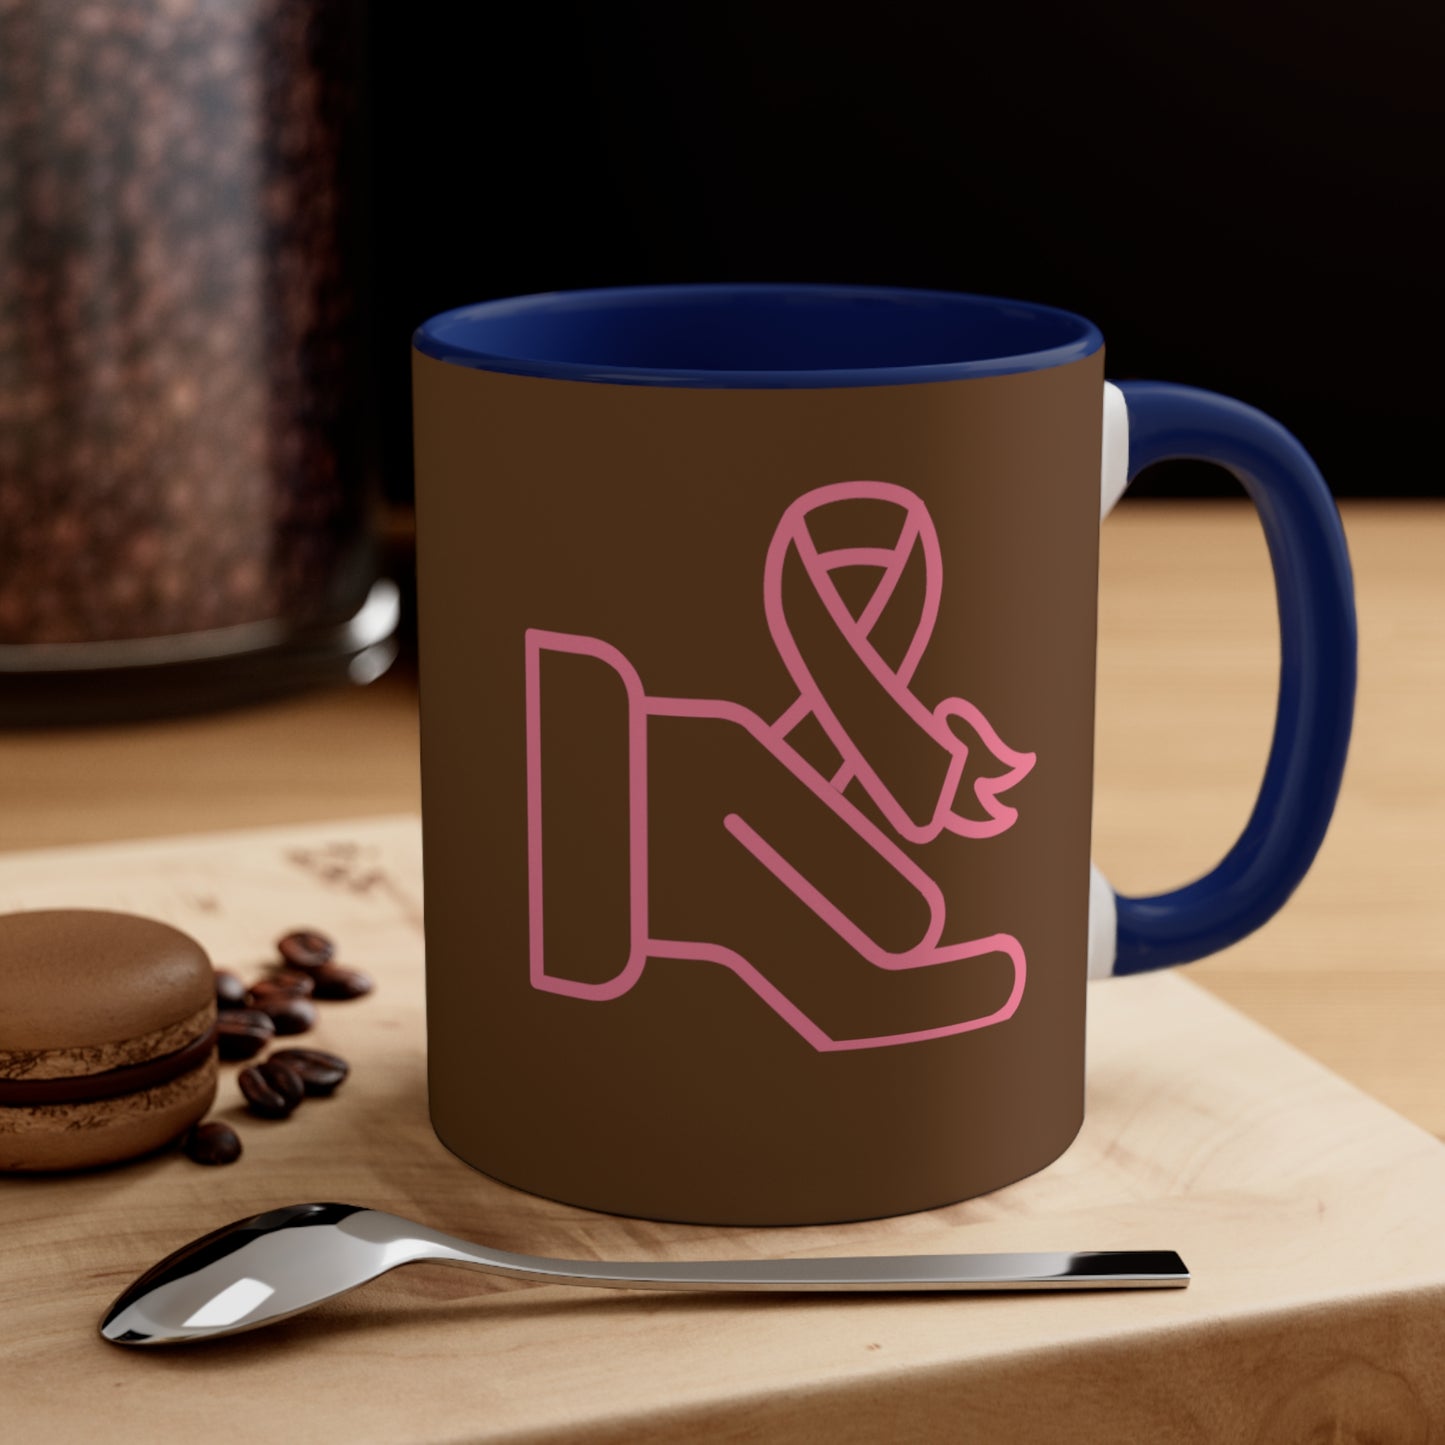 Accent Coffee Mug, 11oz: Fight Cancer Brown